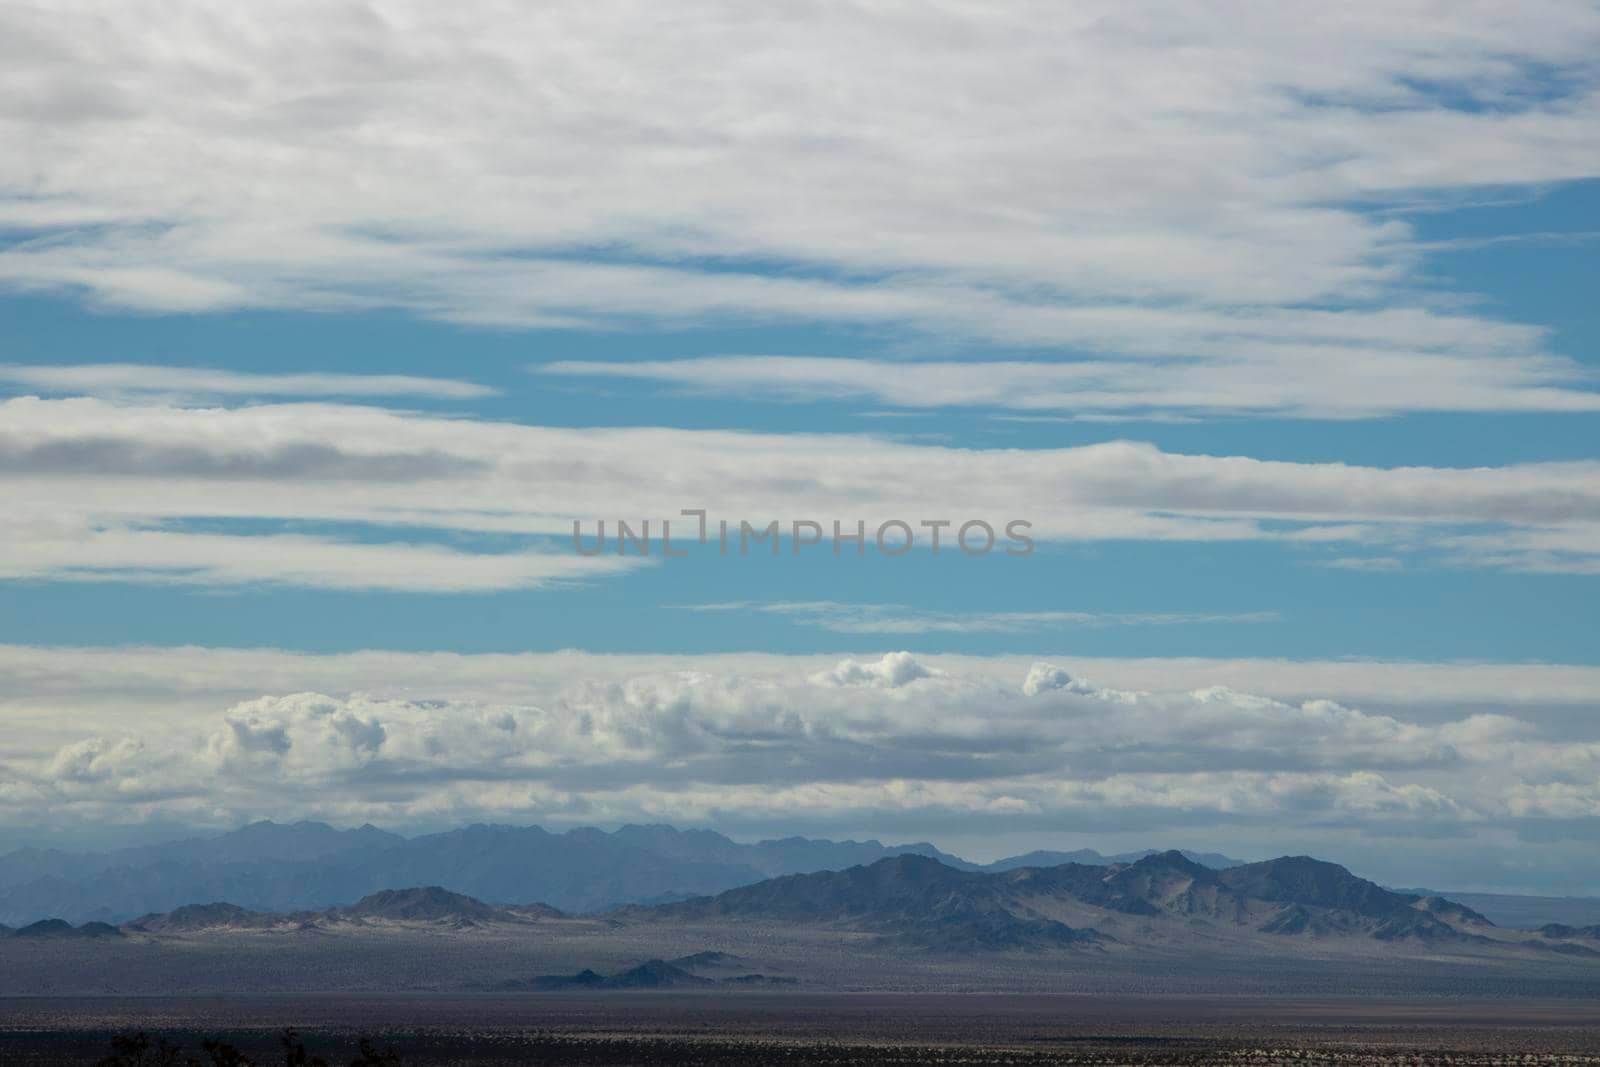 Desert view and some mountains under a cloudy sky